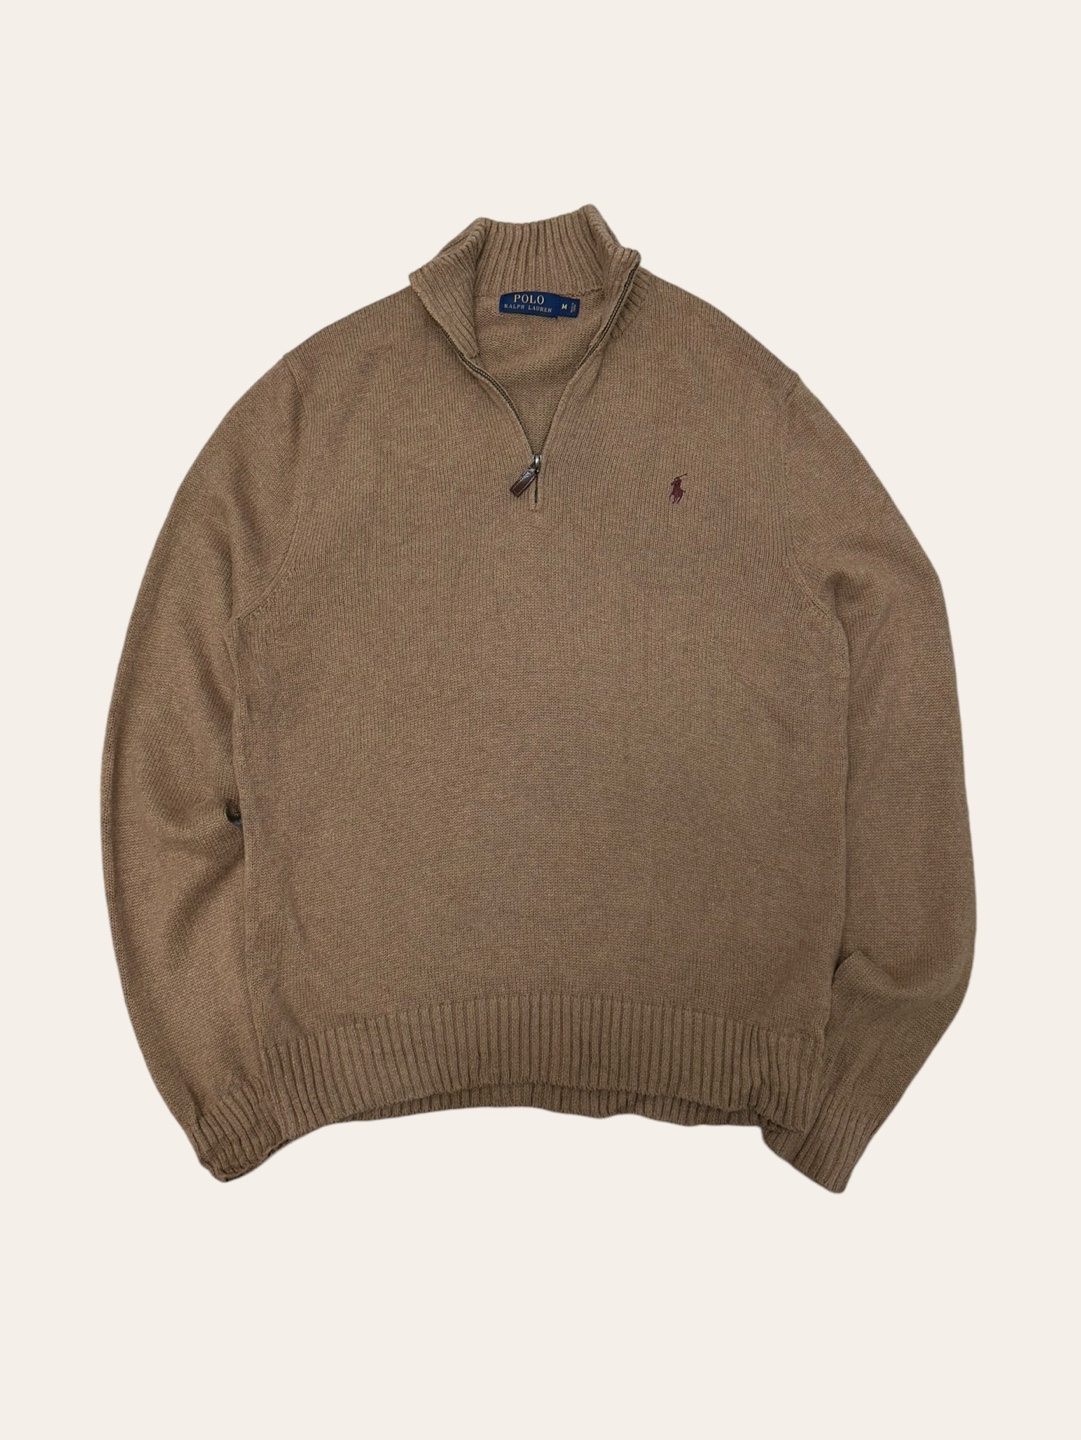 (From USA)Polo ralph lauren camel color cotton pullover M